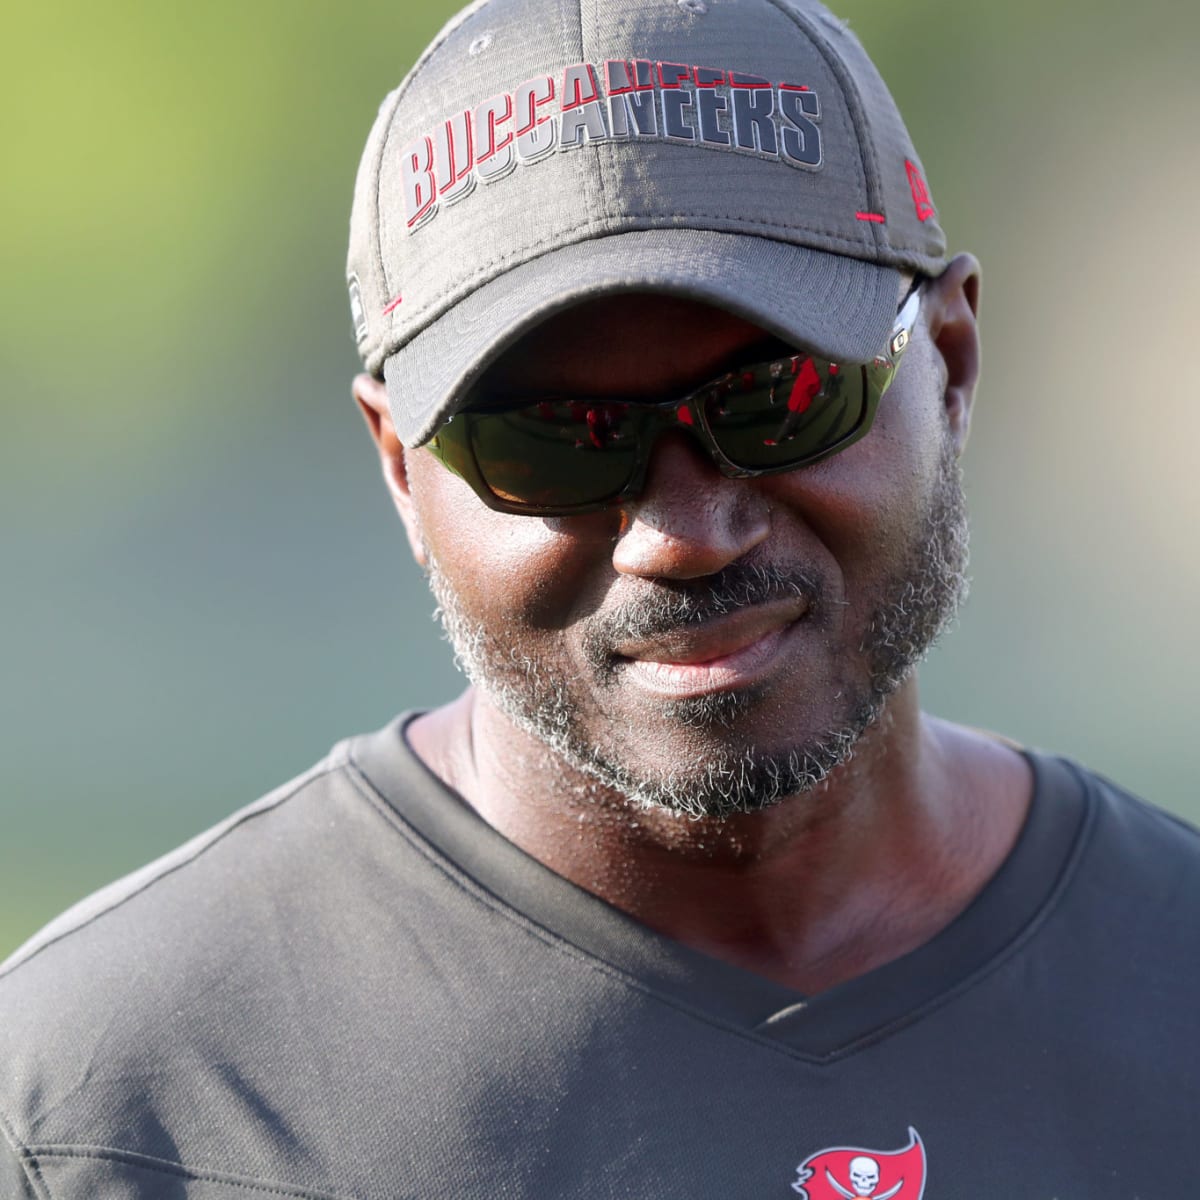 Buccaneers Coach Todd Bowles Says 1 WR 